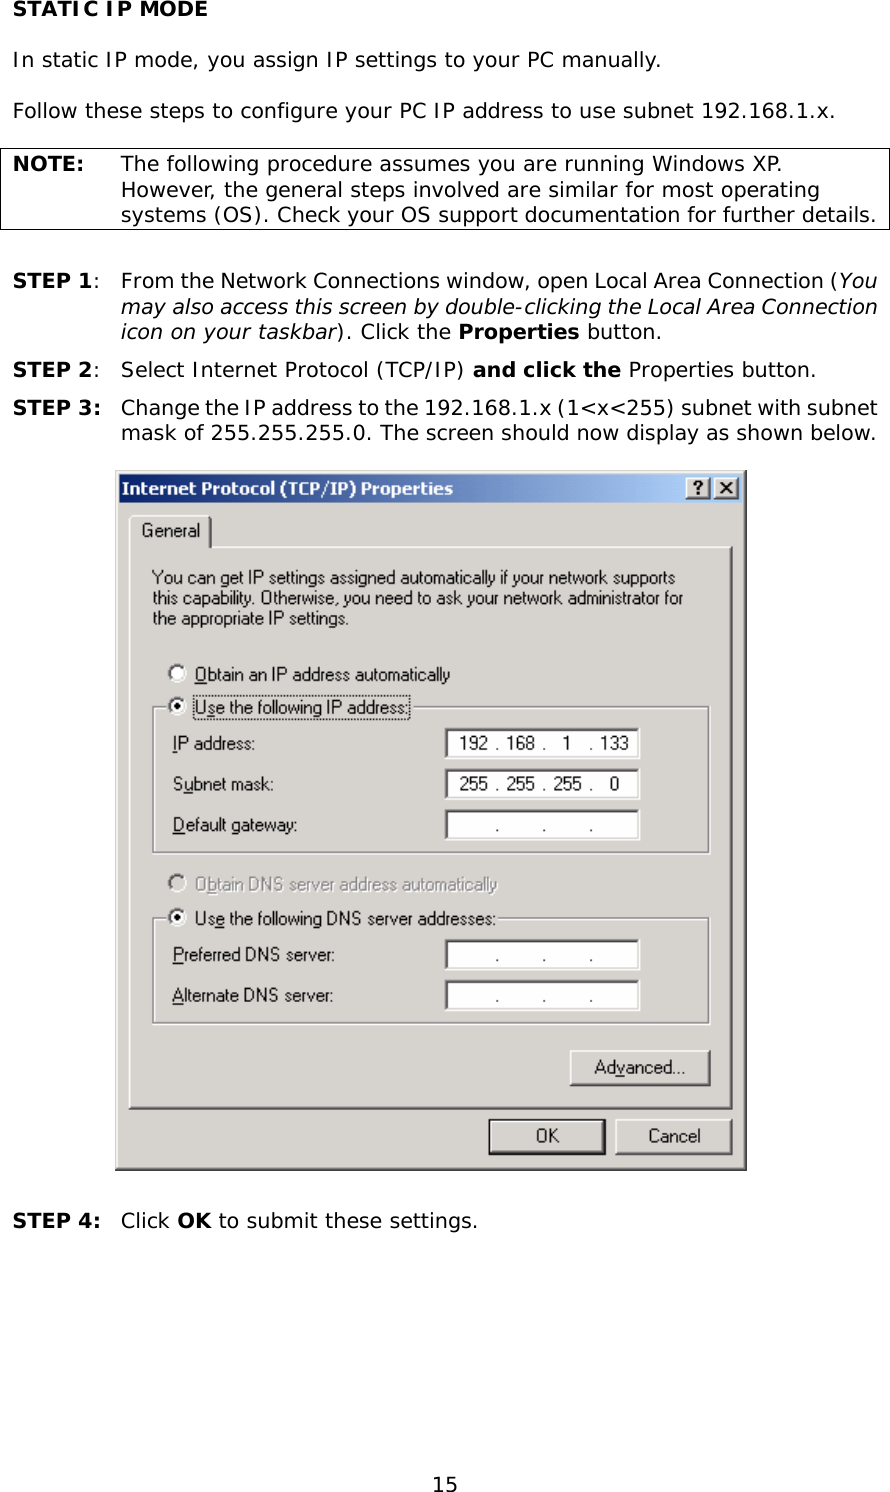  15 STATIC IP MODE  In static IP mode, you assign IP settings to your PC manually.  Follow these steps to configure your PC IP address to use subnet 192.168.1.x.  NOTE:  The following procedure assumes you are running Windows XP.  However, the general steps involved are similar for most operating systems (OS). Check your OS support documentation for further details.  STEP 1:  From the Network Connections window, open Local Area Connection (You may also access this screen by double-clicking the Local Area Connection icon on your taskbar). Click the Properties button. STEP 2:  Select Internet Protocol (TCP/IP) and click the Properties button. STEP 3:  Change the IP address to the 192.168.1.x (1&lt;x&lt;255) subnet with subnet mask of 255.255.255.0. The screen should now display as shown below.     STEP 4:  Click OK to submit these settings.  